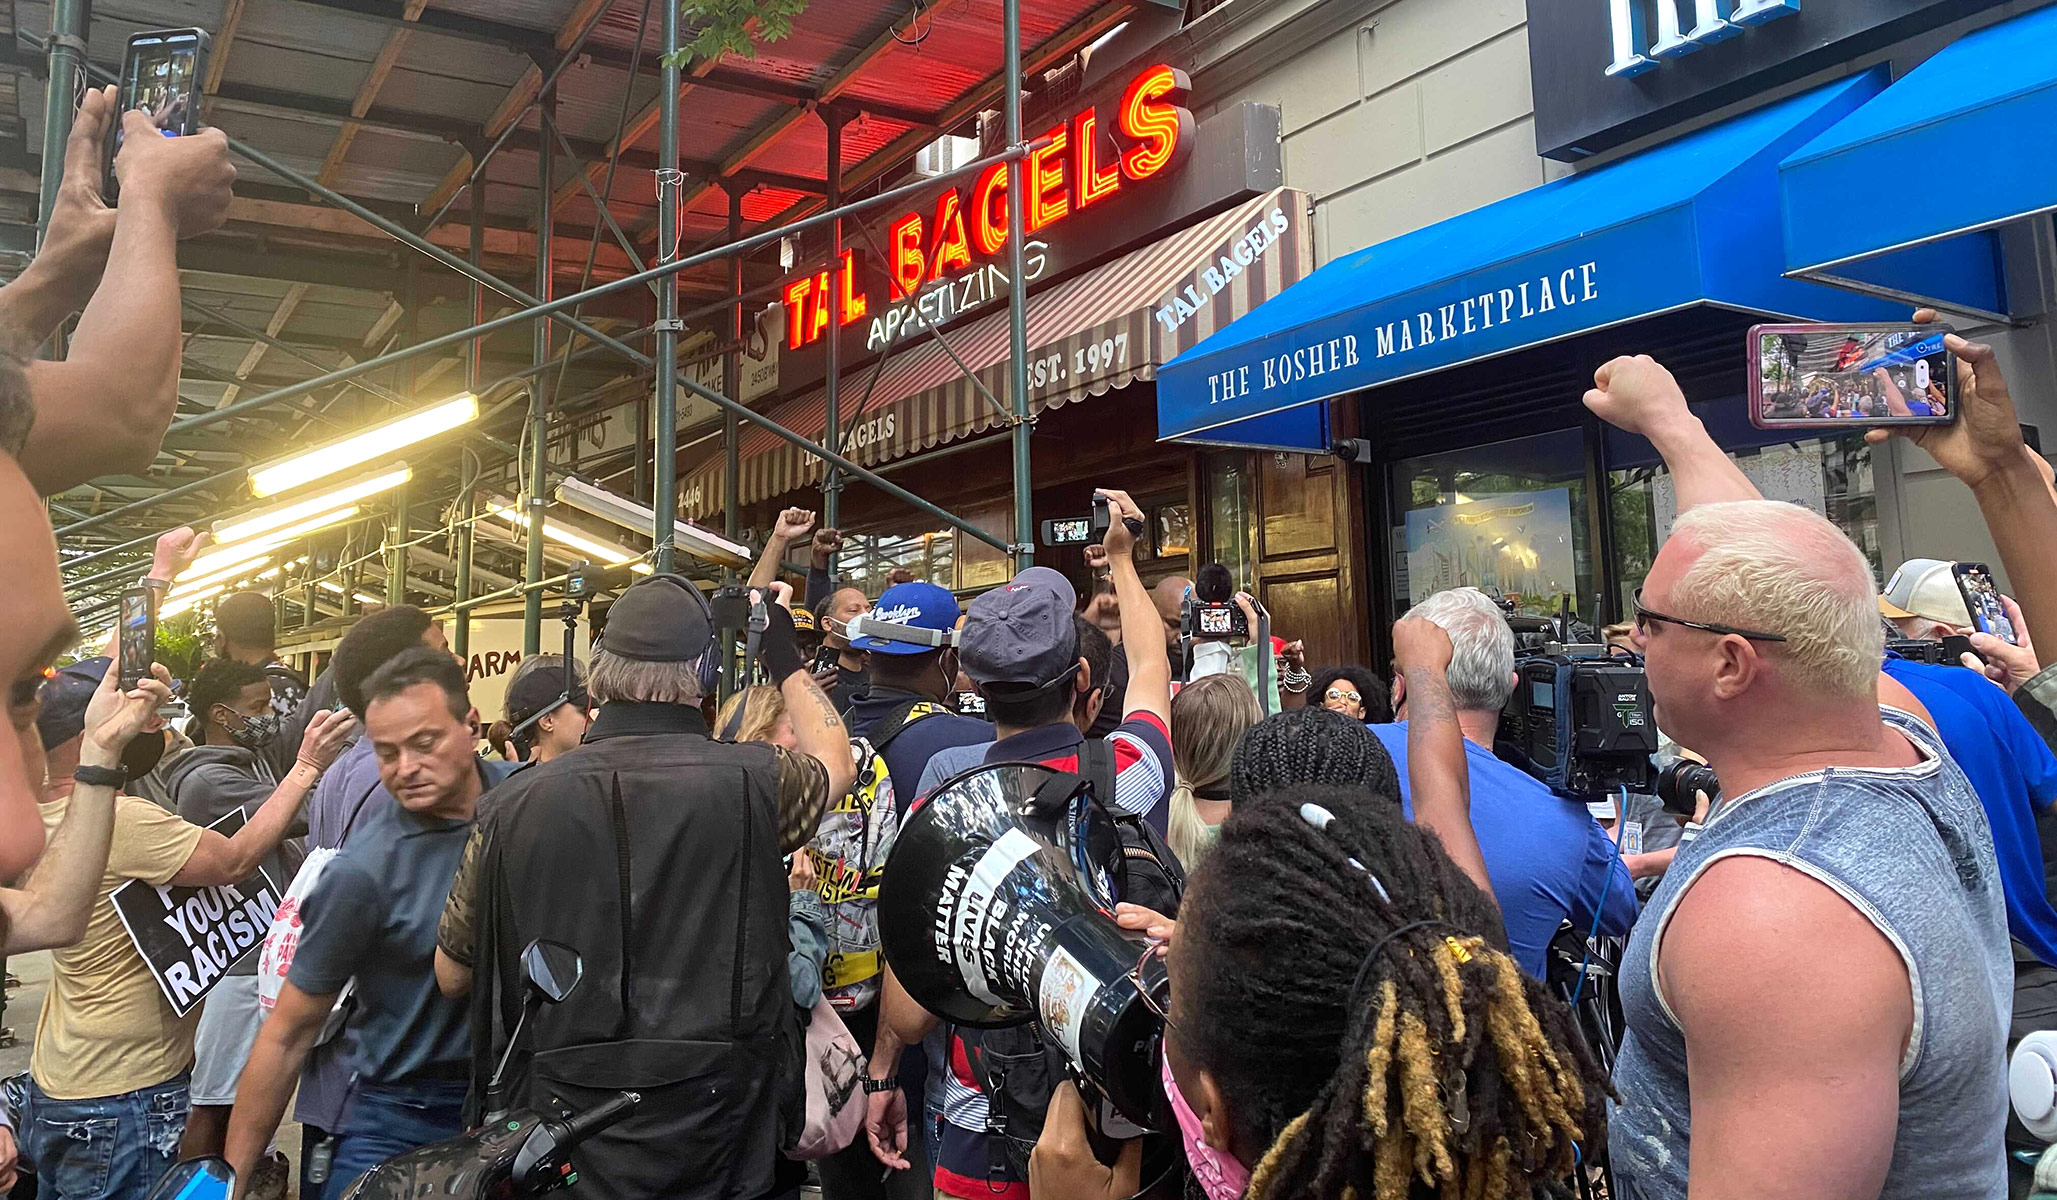 After Altercation at Restaurant, Black Lives Matter Claims NYC Vaccine Mandate Is Being Weaponized